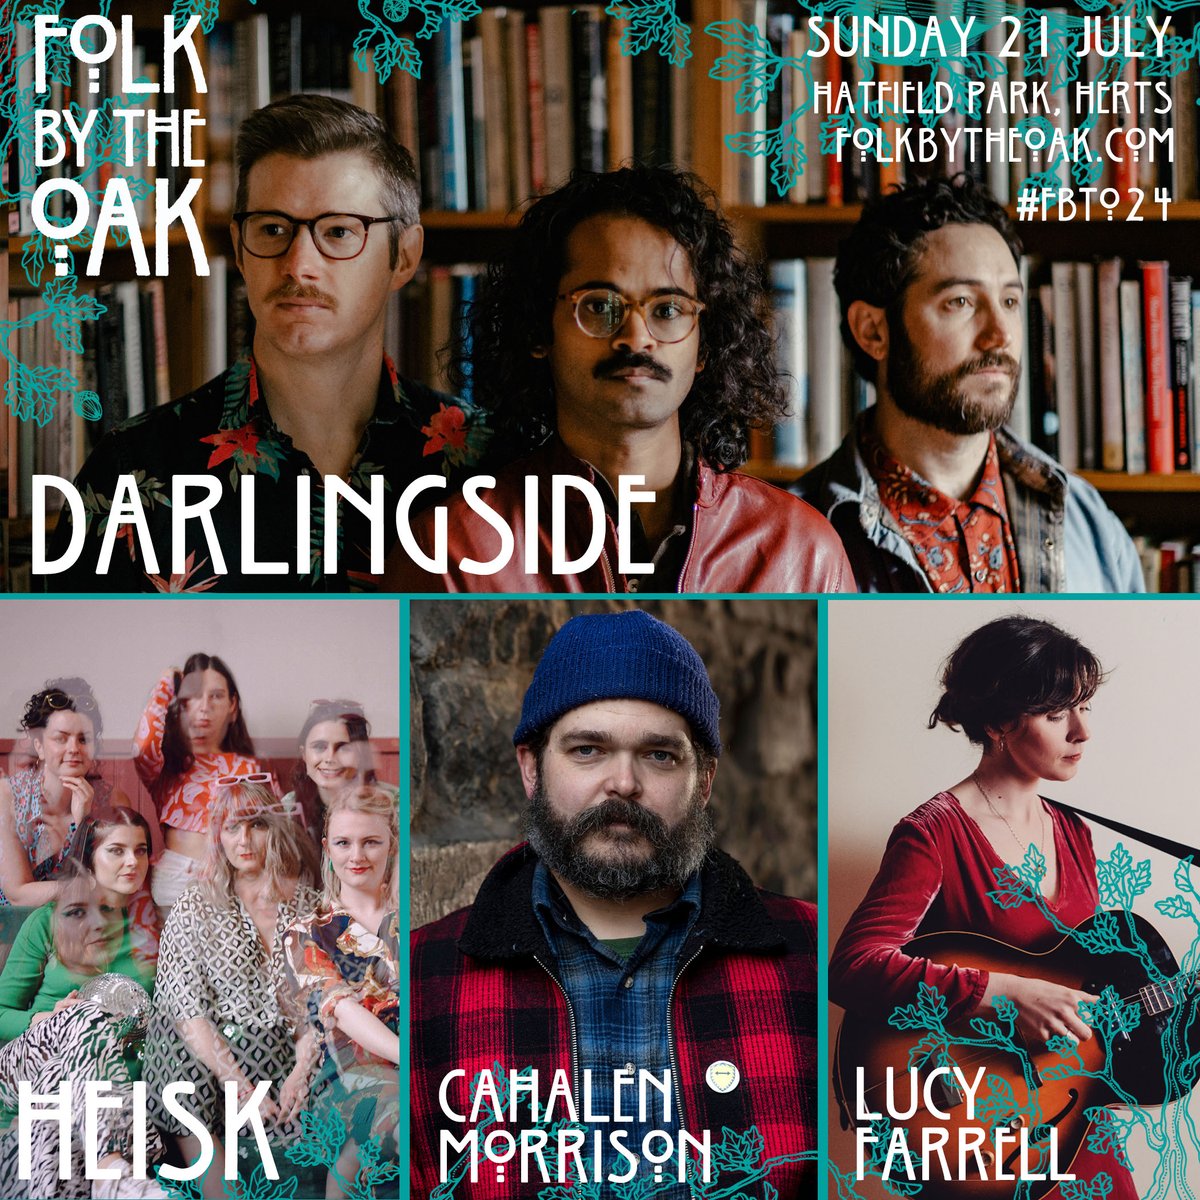 🎉Our final 2024 Line-up Announcements! @darlingside will bring their sophisticated harmonies & precision playing to our Main Stage Roots multi-instrumentalist @CahalenMorrison, leading contemporary folk artist @LucyLucyfarrell & the dazzling HEISK join our Acorn Stage line-up✨